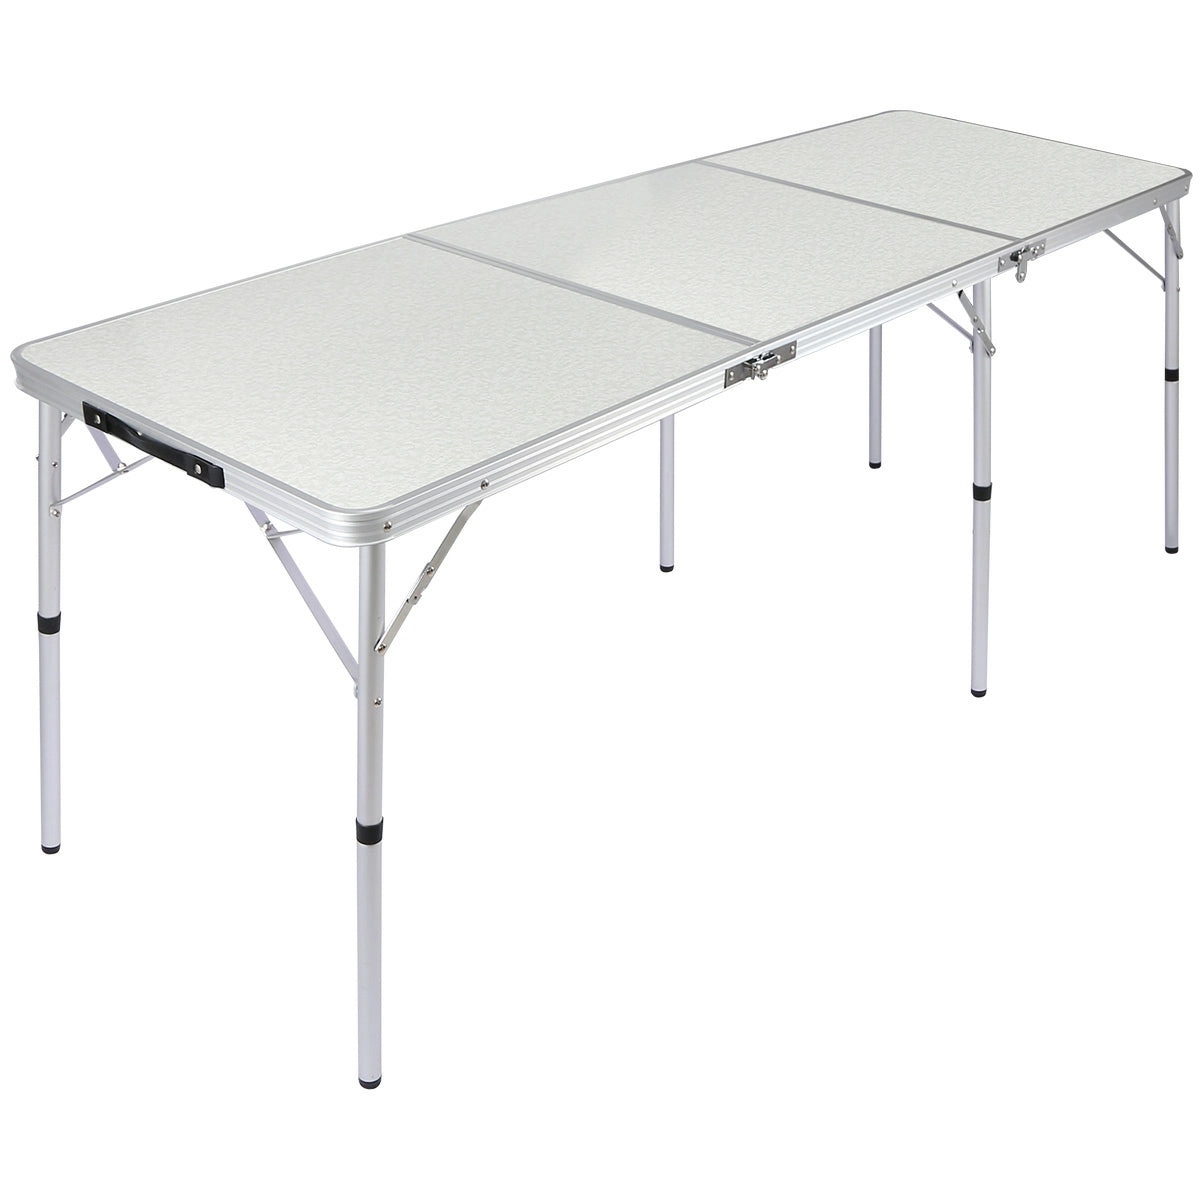 Portable Tri-Fold Aluminum Camping Table with Adjustable Heights, 4ft/6ft